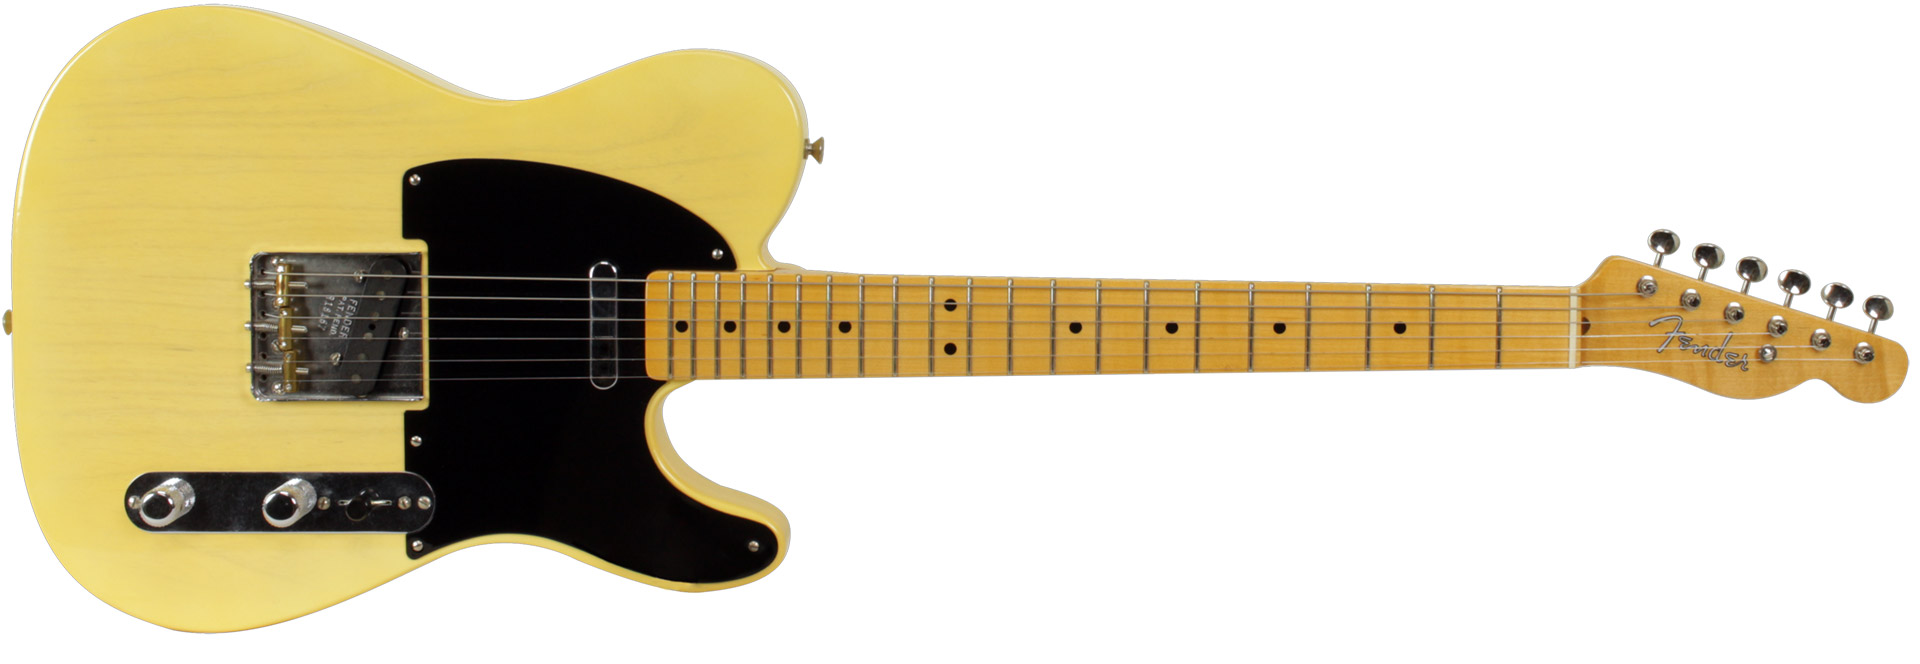 GUITARRA FENDER 51 NOCASTER LUSH CLOSED CLASSIC 2018 COLLECTION 923-5000-524 F.NOCASTER BLOND